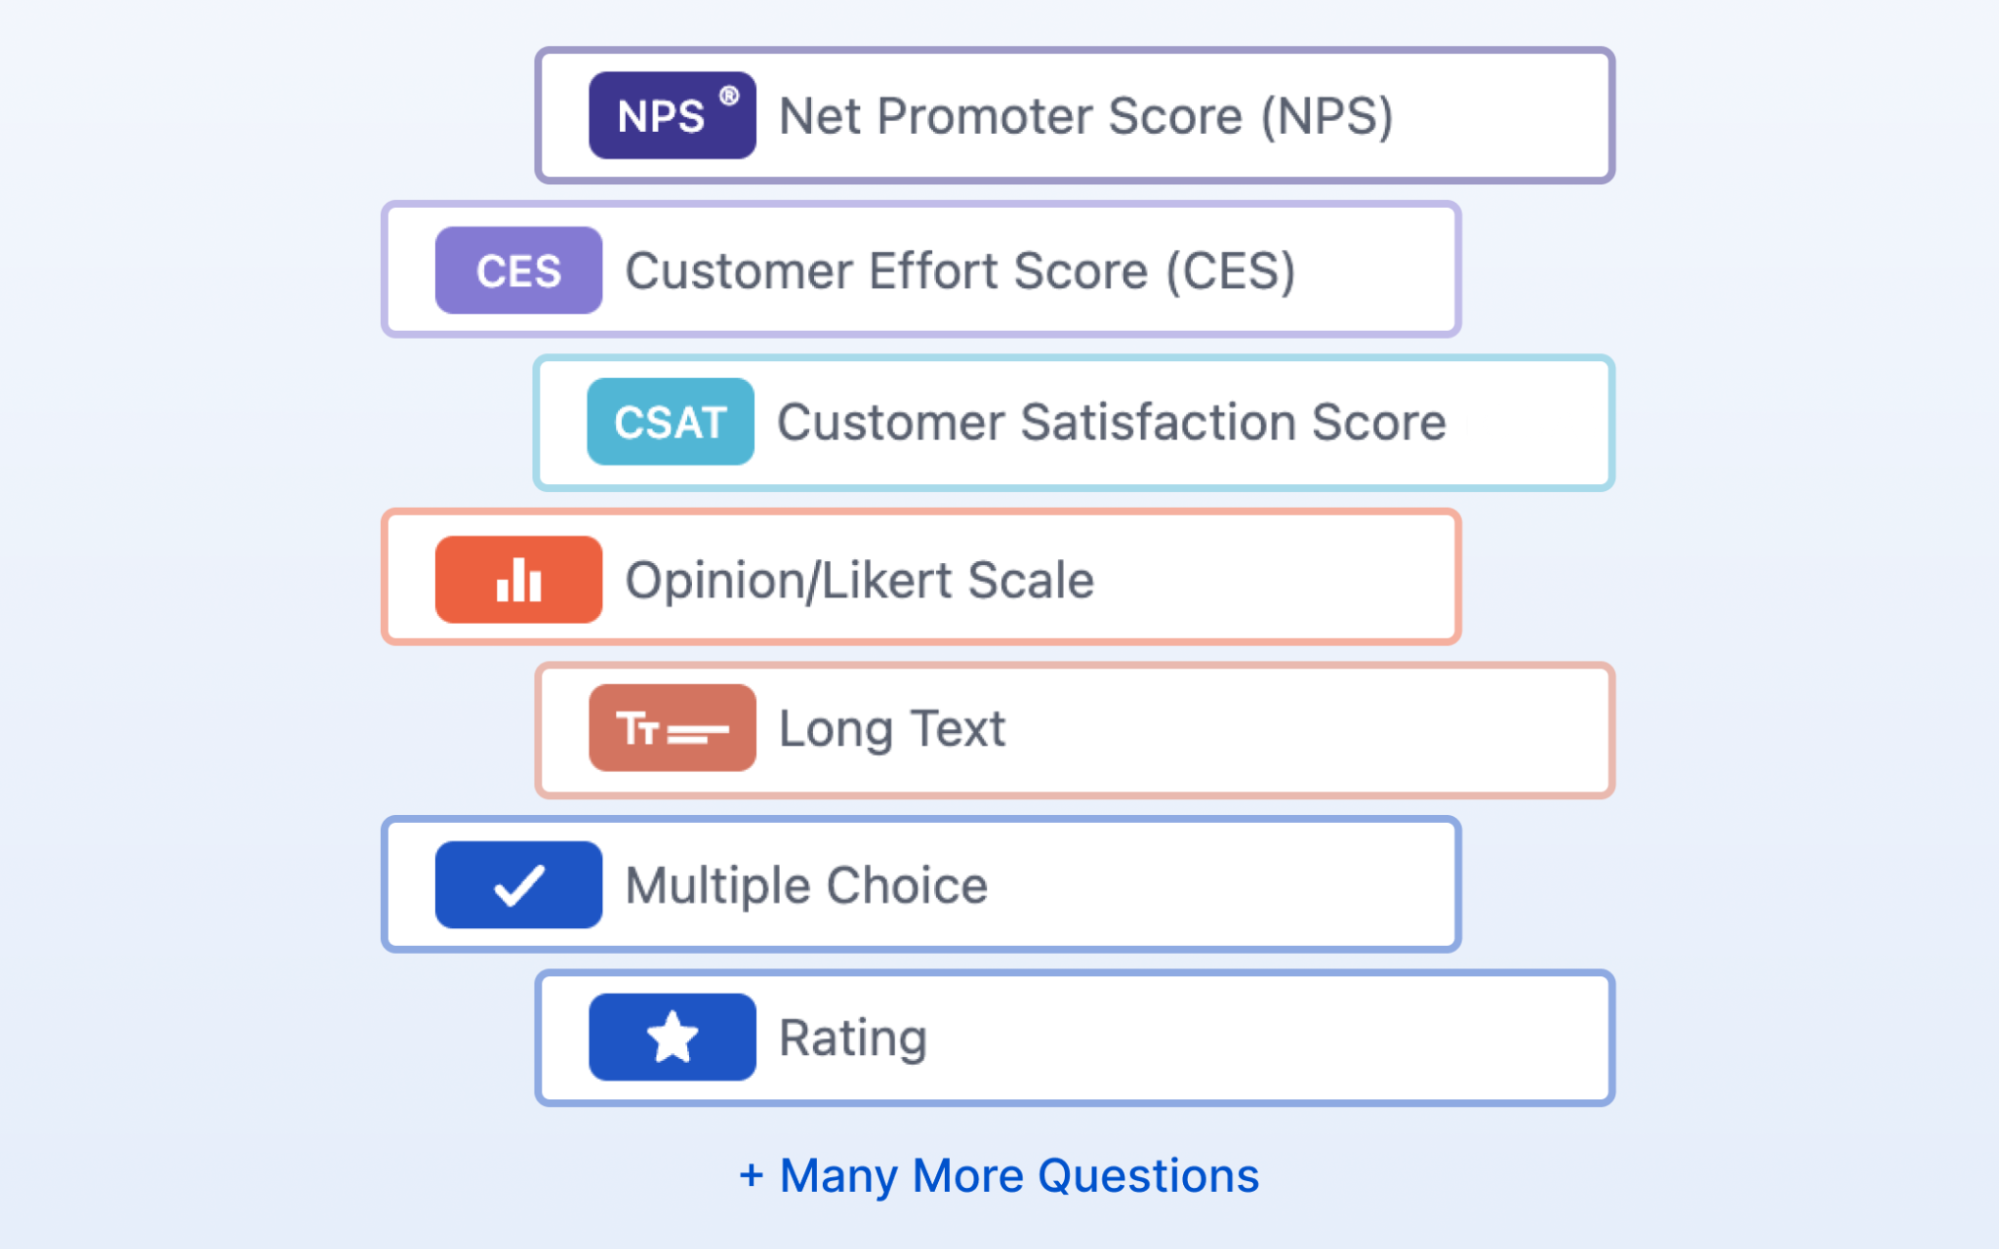 This is the image of the different question types like multiple choice questions, long text questions, rating questions, Likert scale questions, etc. 